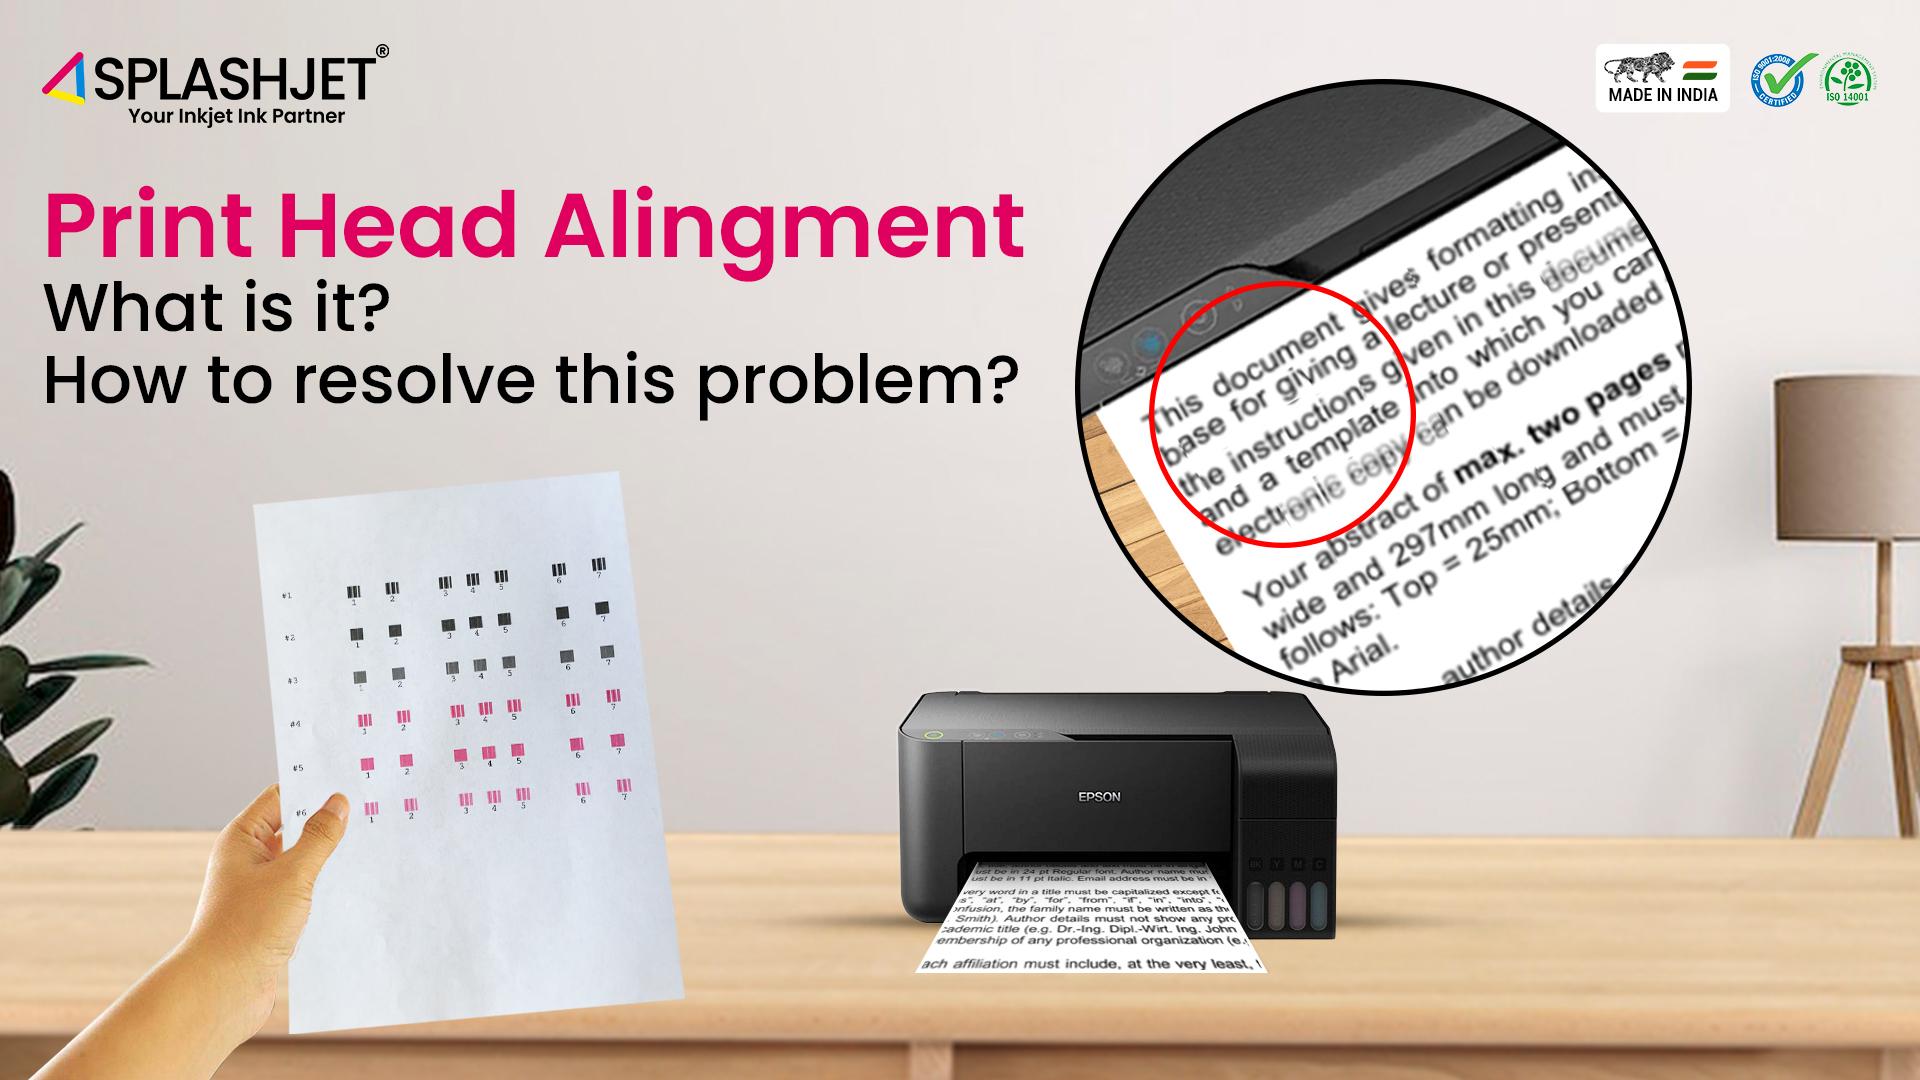 Print Head Alignment: What is it? & How to resolve this problem?